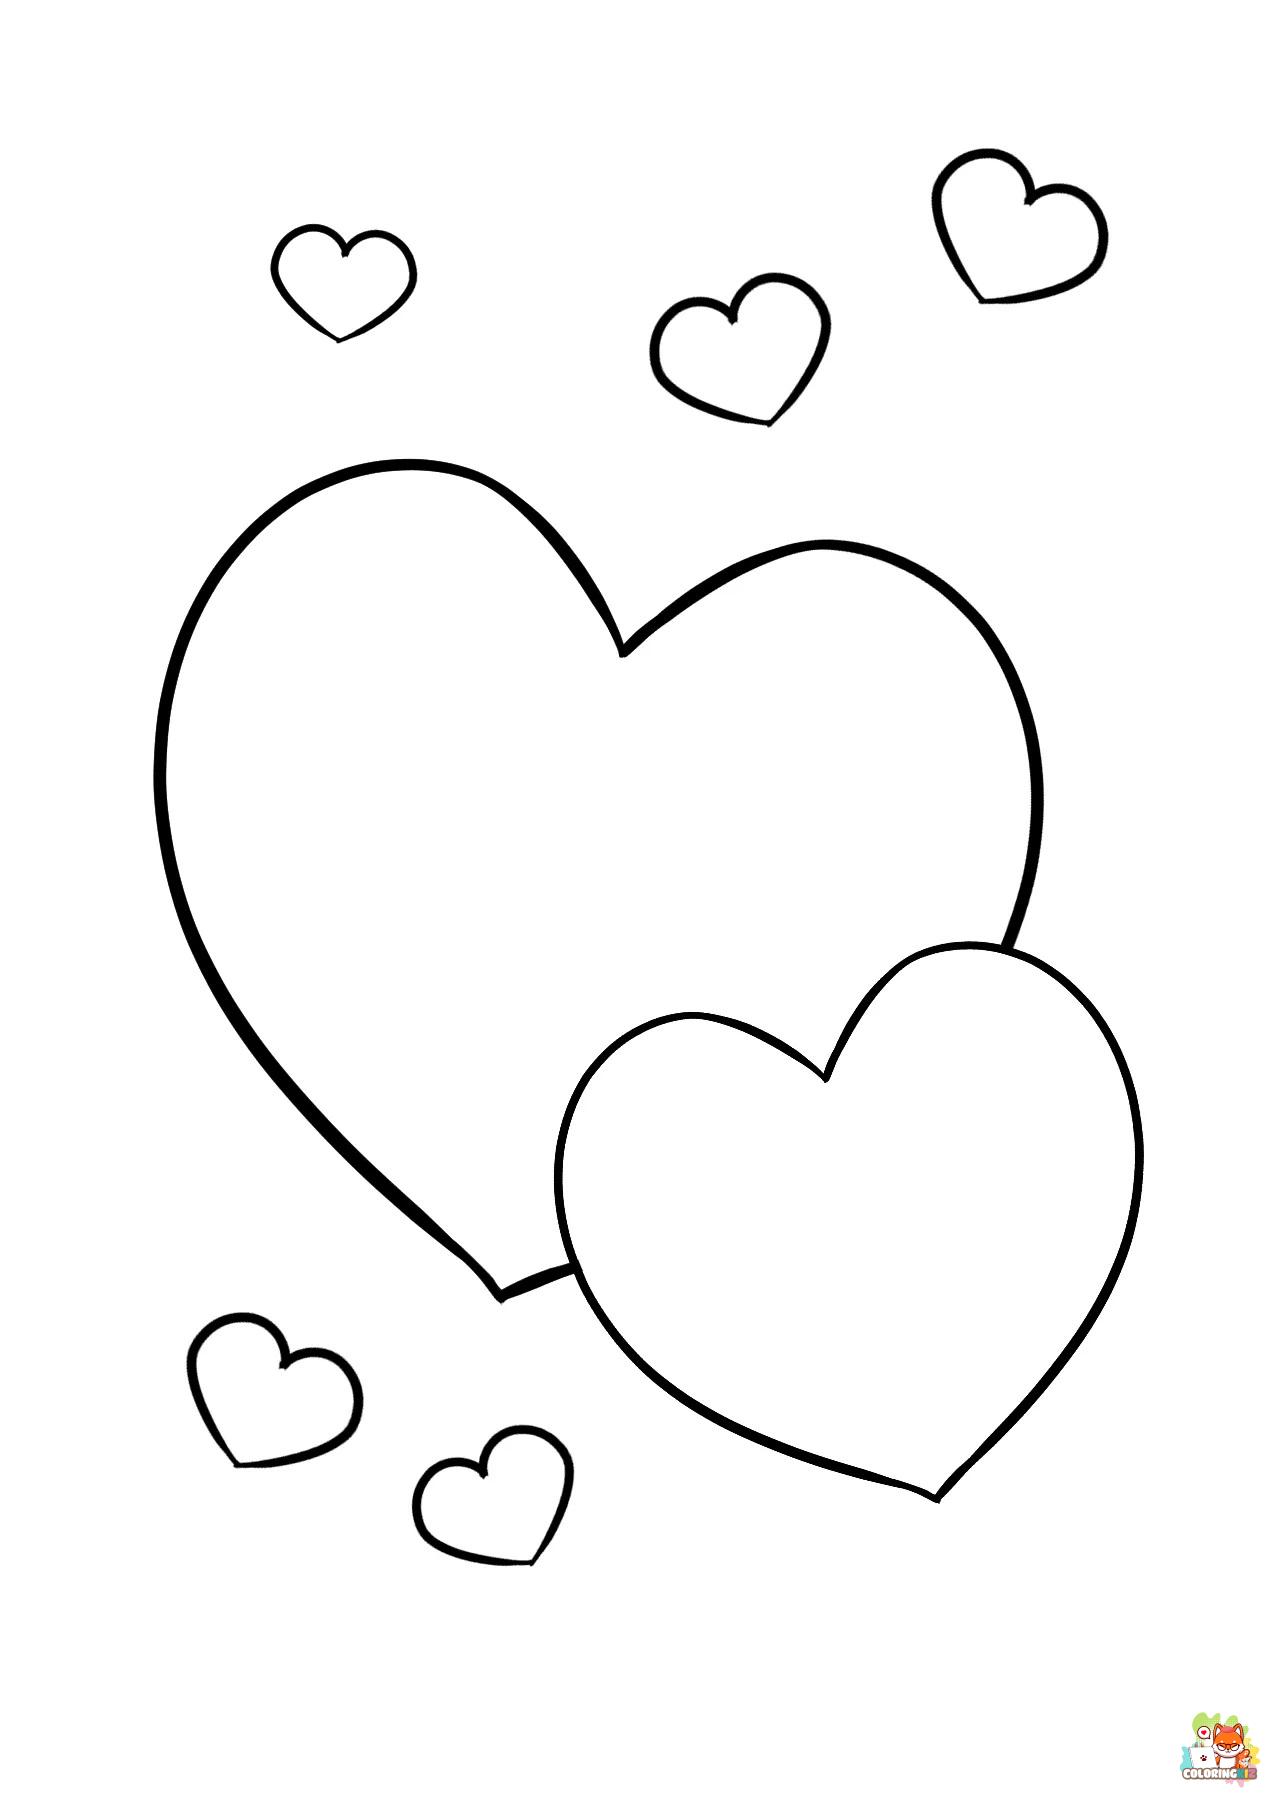 coloring pages about love